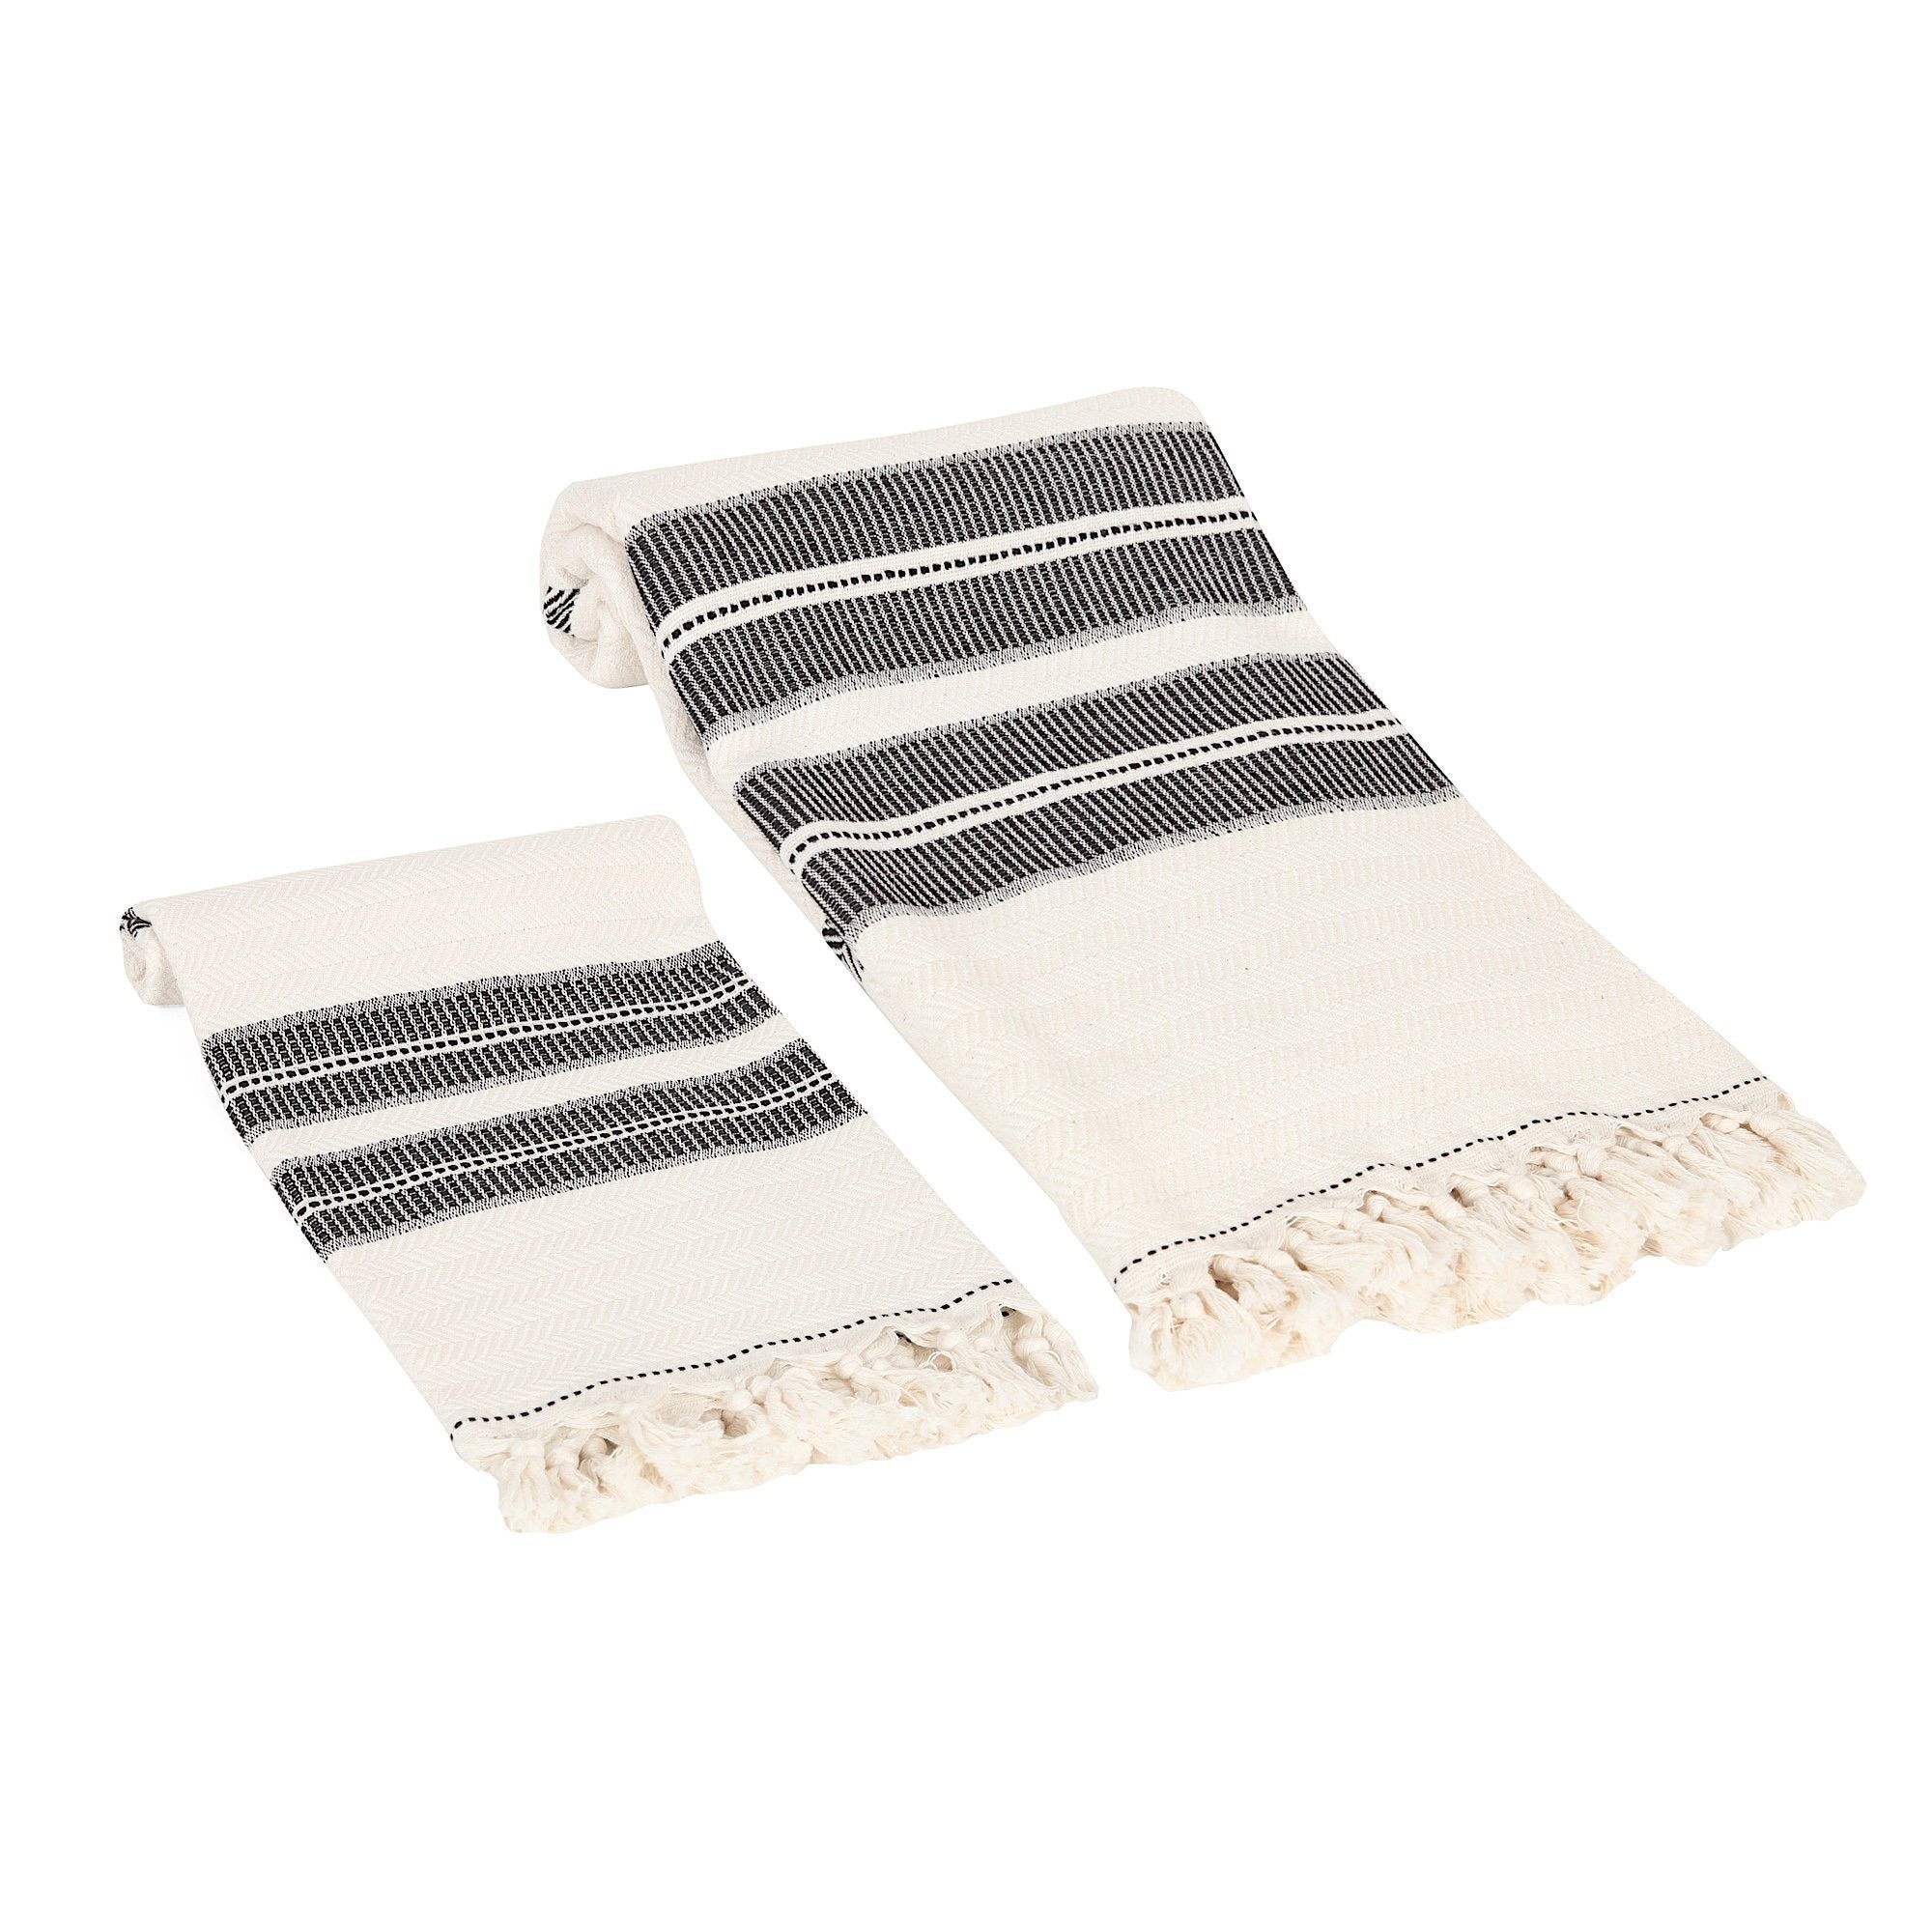 Costa Ivory Turkish Towel Set - Olive and Linen